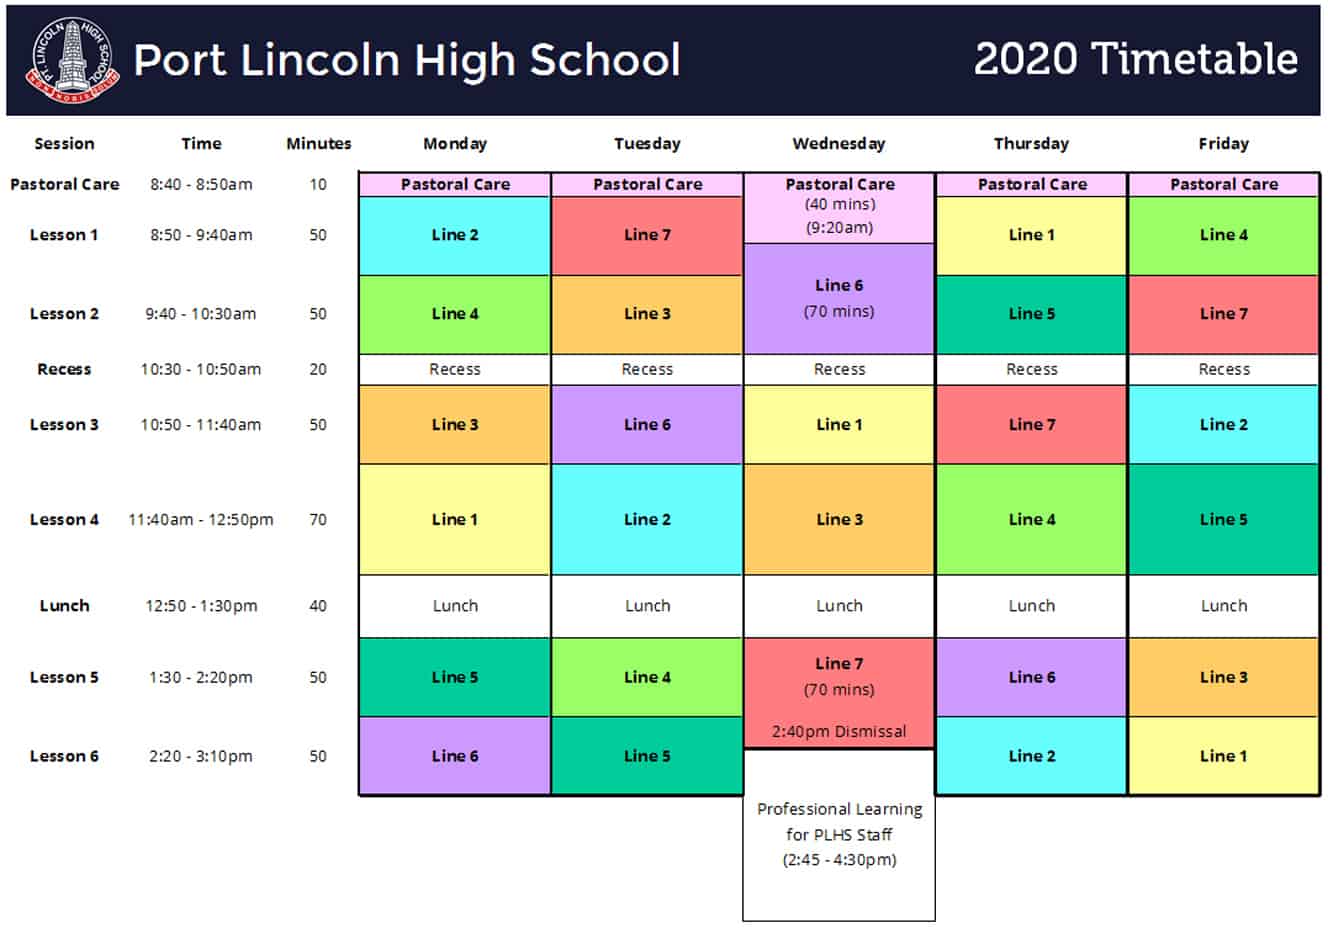 new-plhs-timetable-for-2020-beyond-port-lincoln-high-school